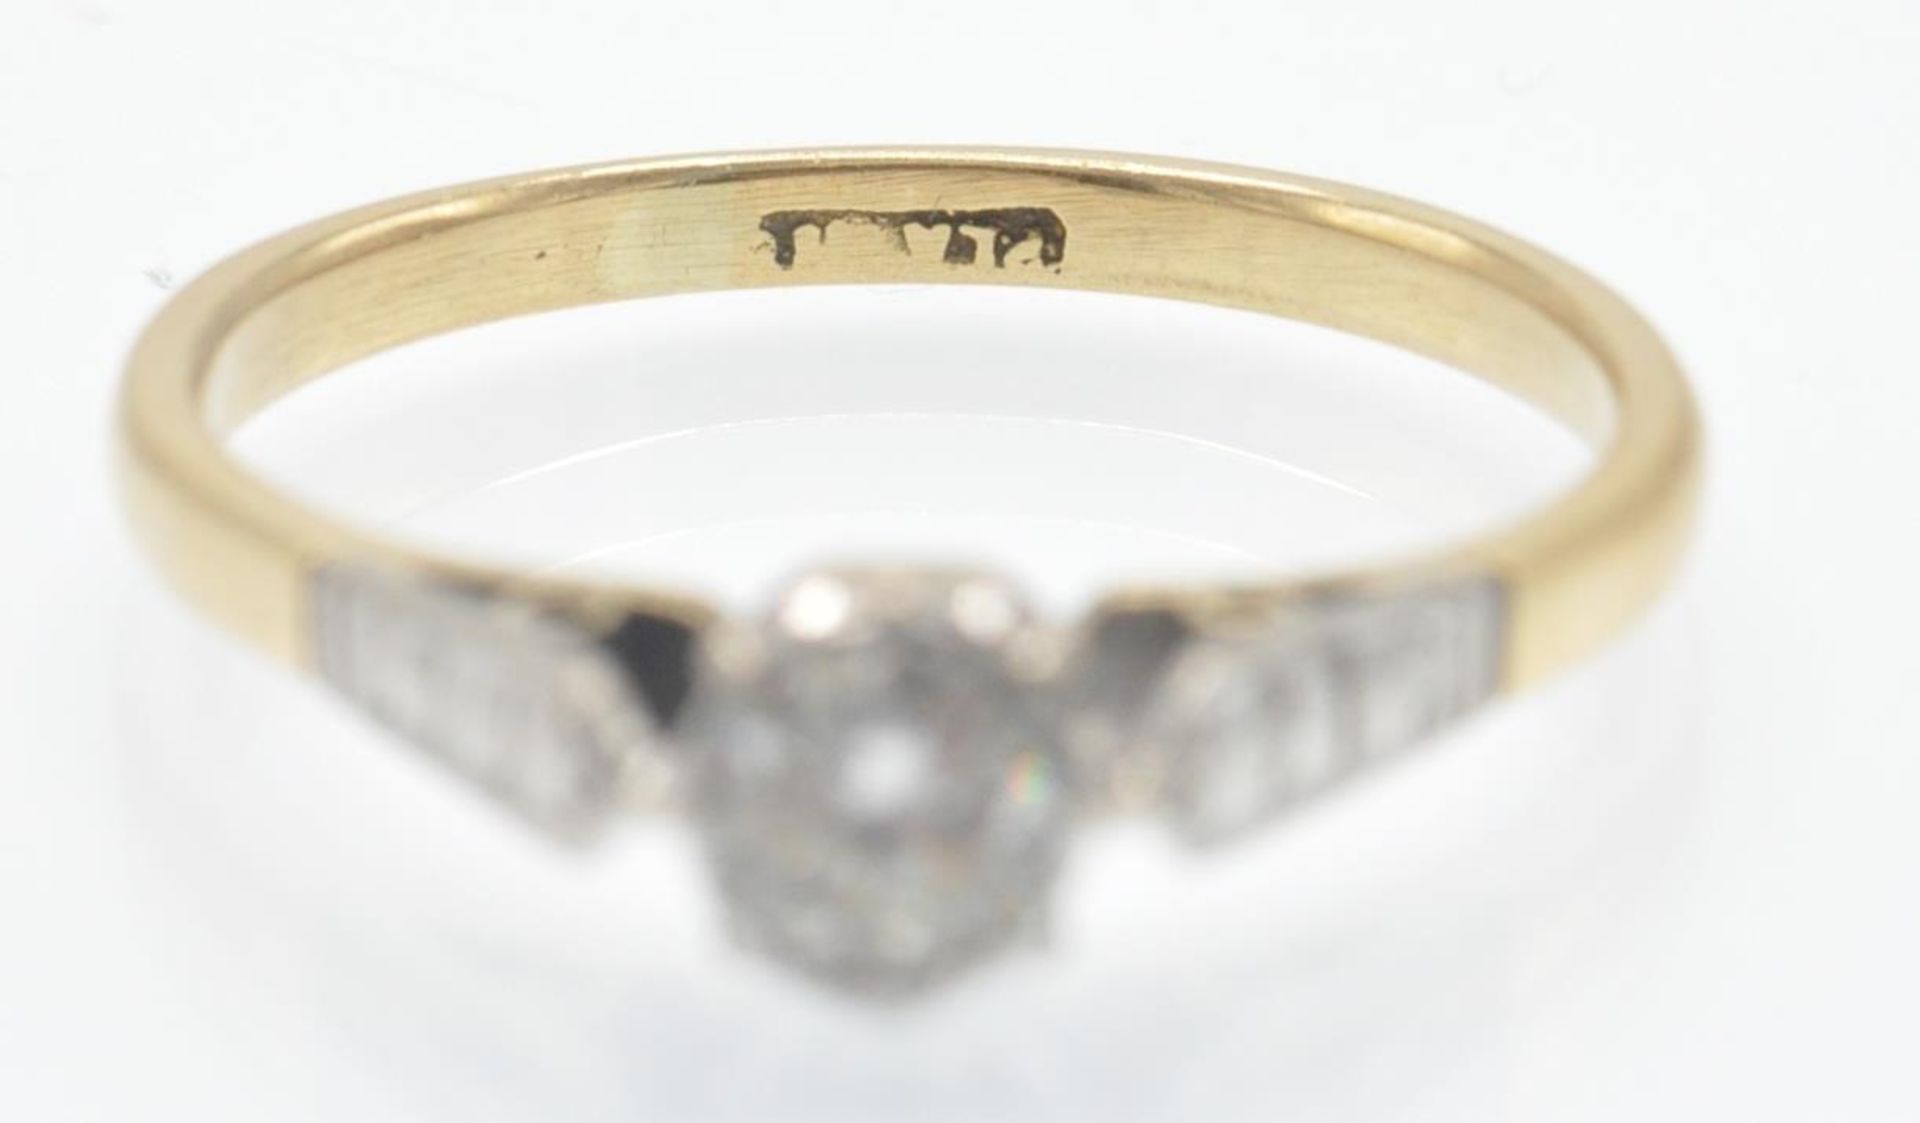 A Vintage 18ct Gold & Platinum Solitaire Diamond Ring - Image 4 of 5